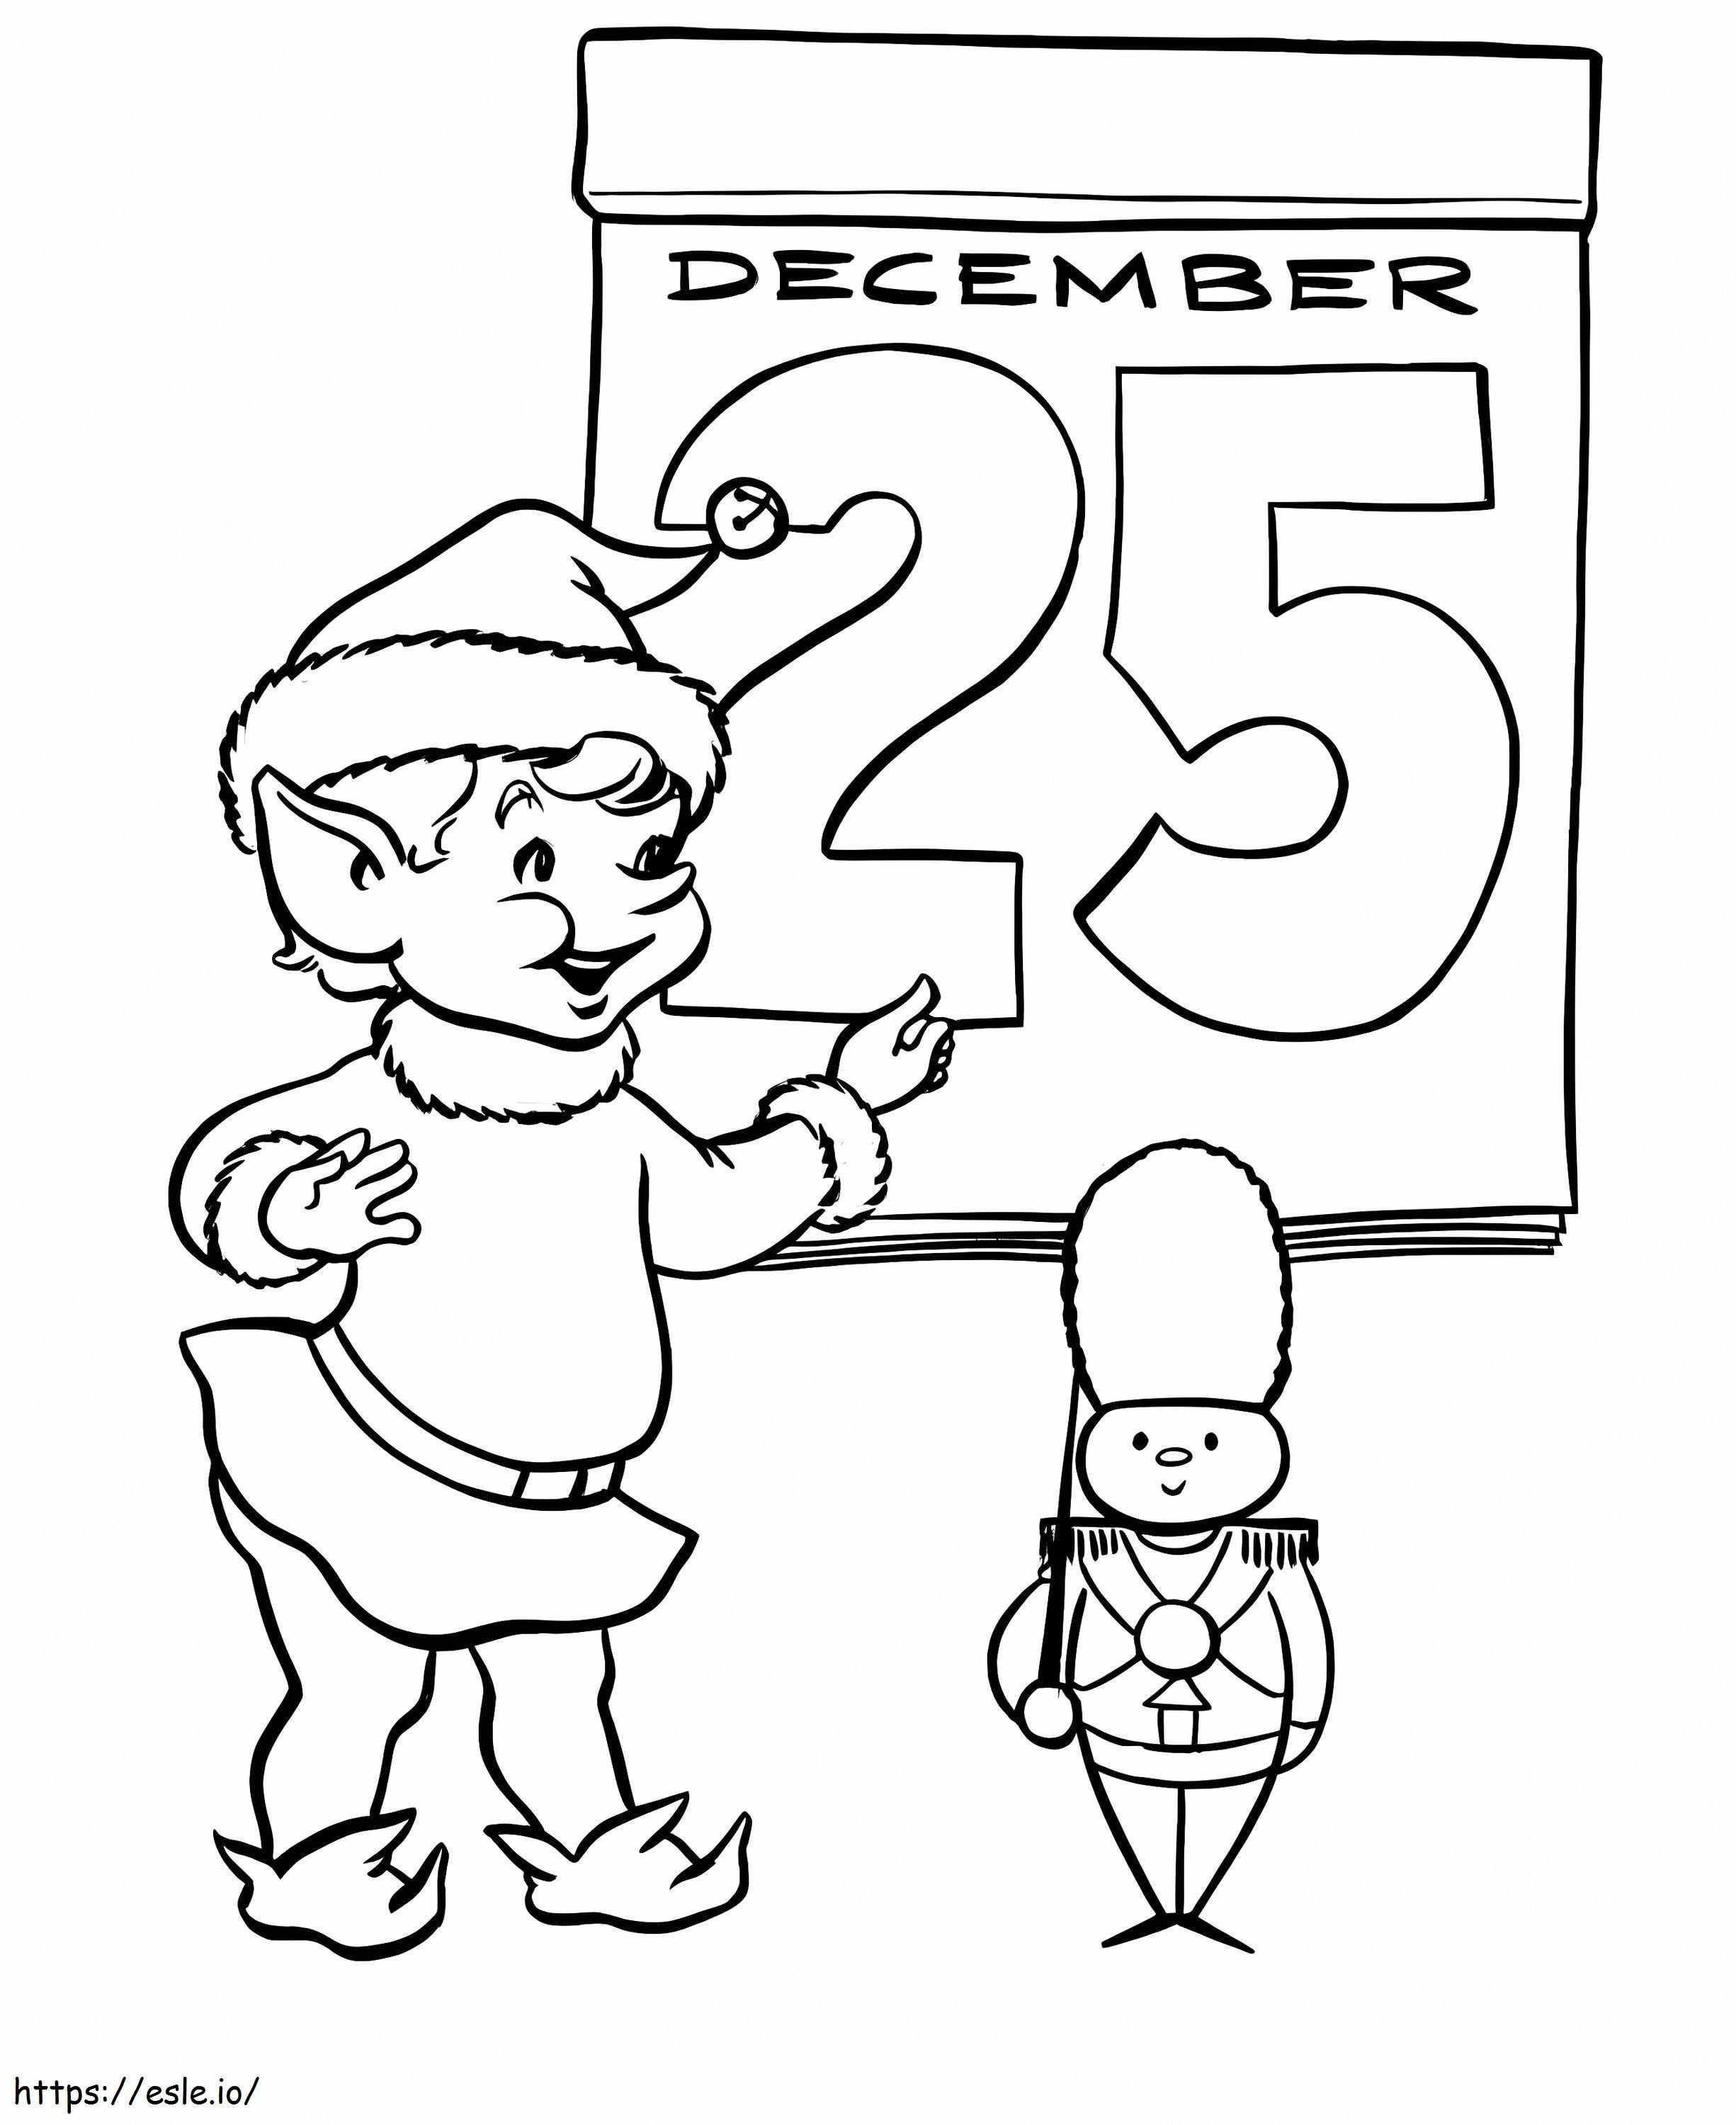 December 25Th coloring page